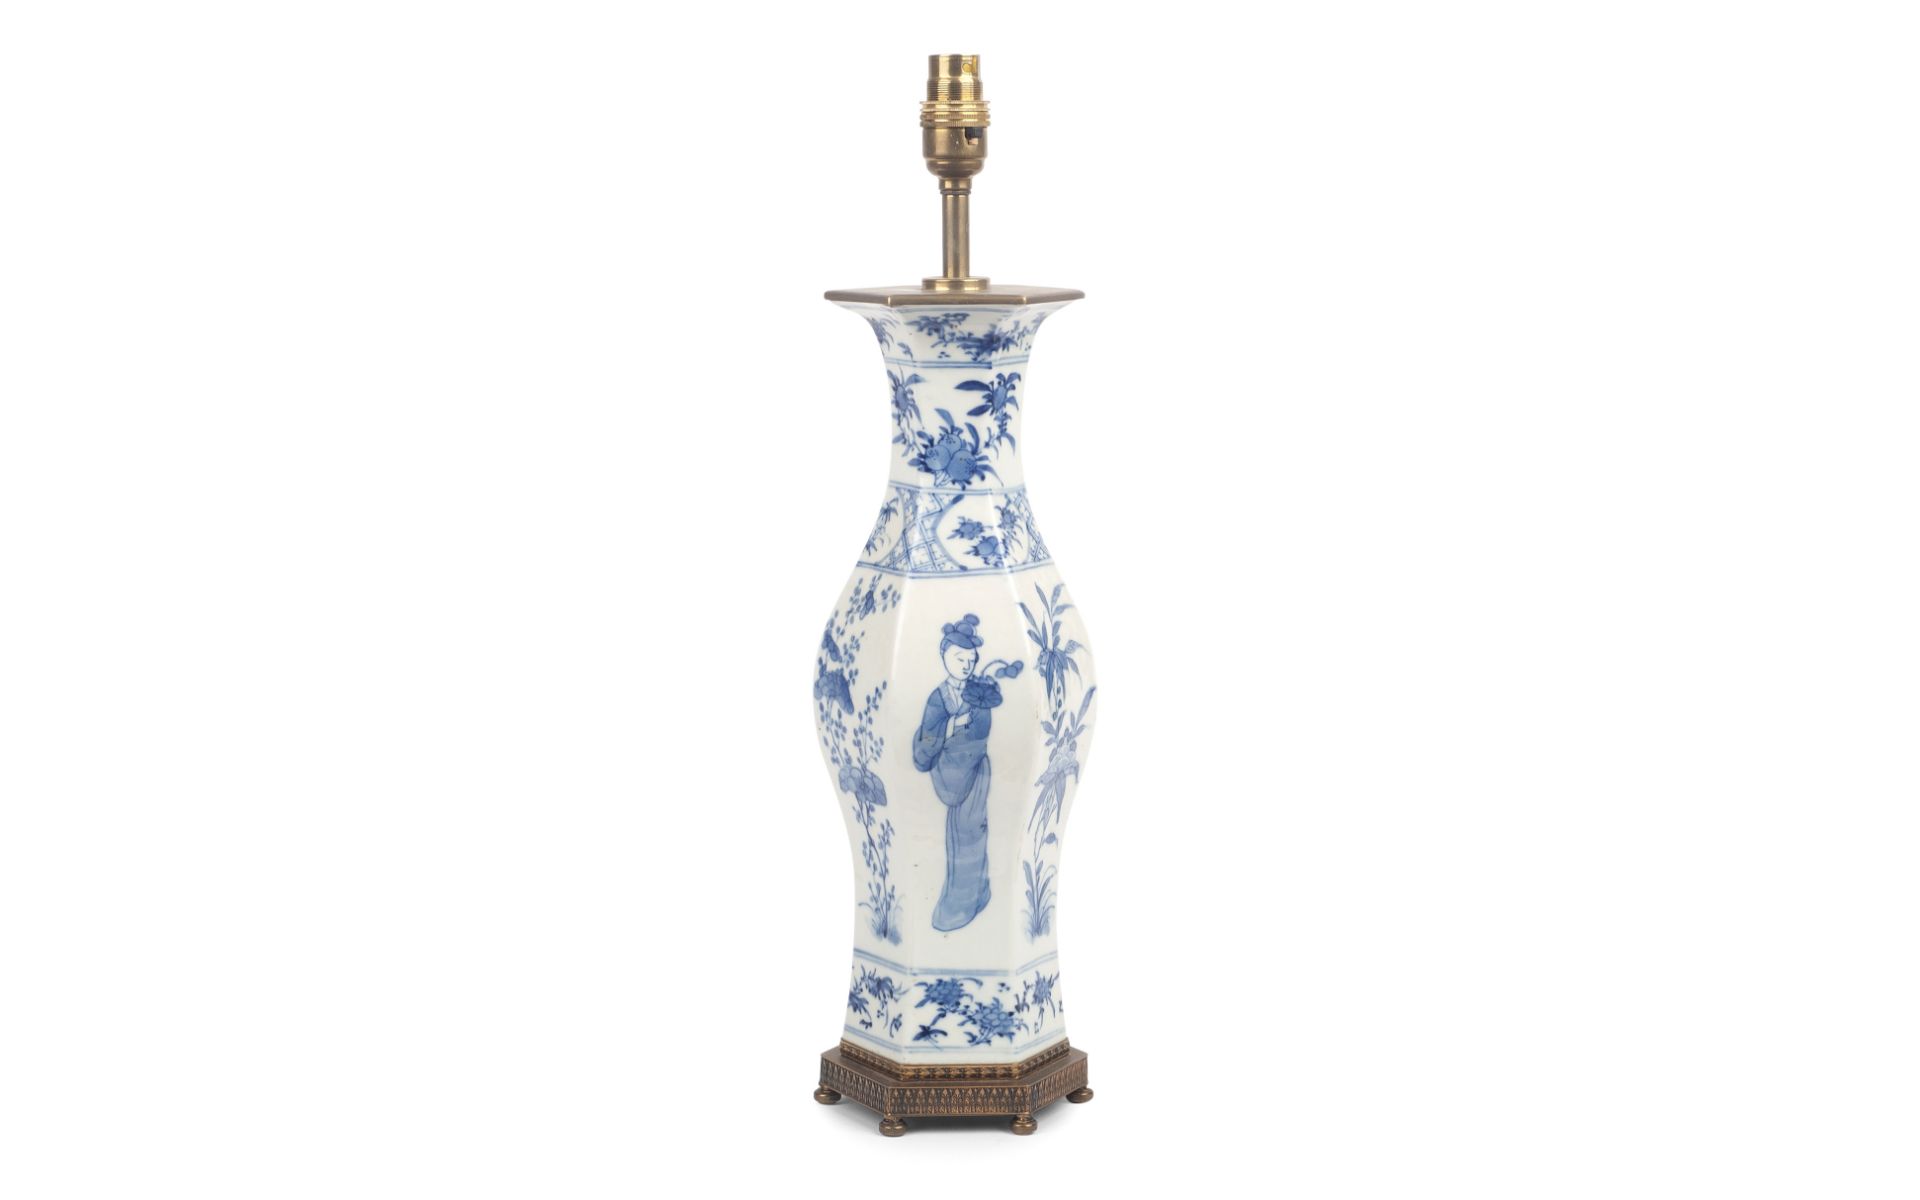 A 19TH CENTURY CHINESE BLUE AND WHITE PORCELAIN VASE ADAPTED AS A LAMP BASE